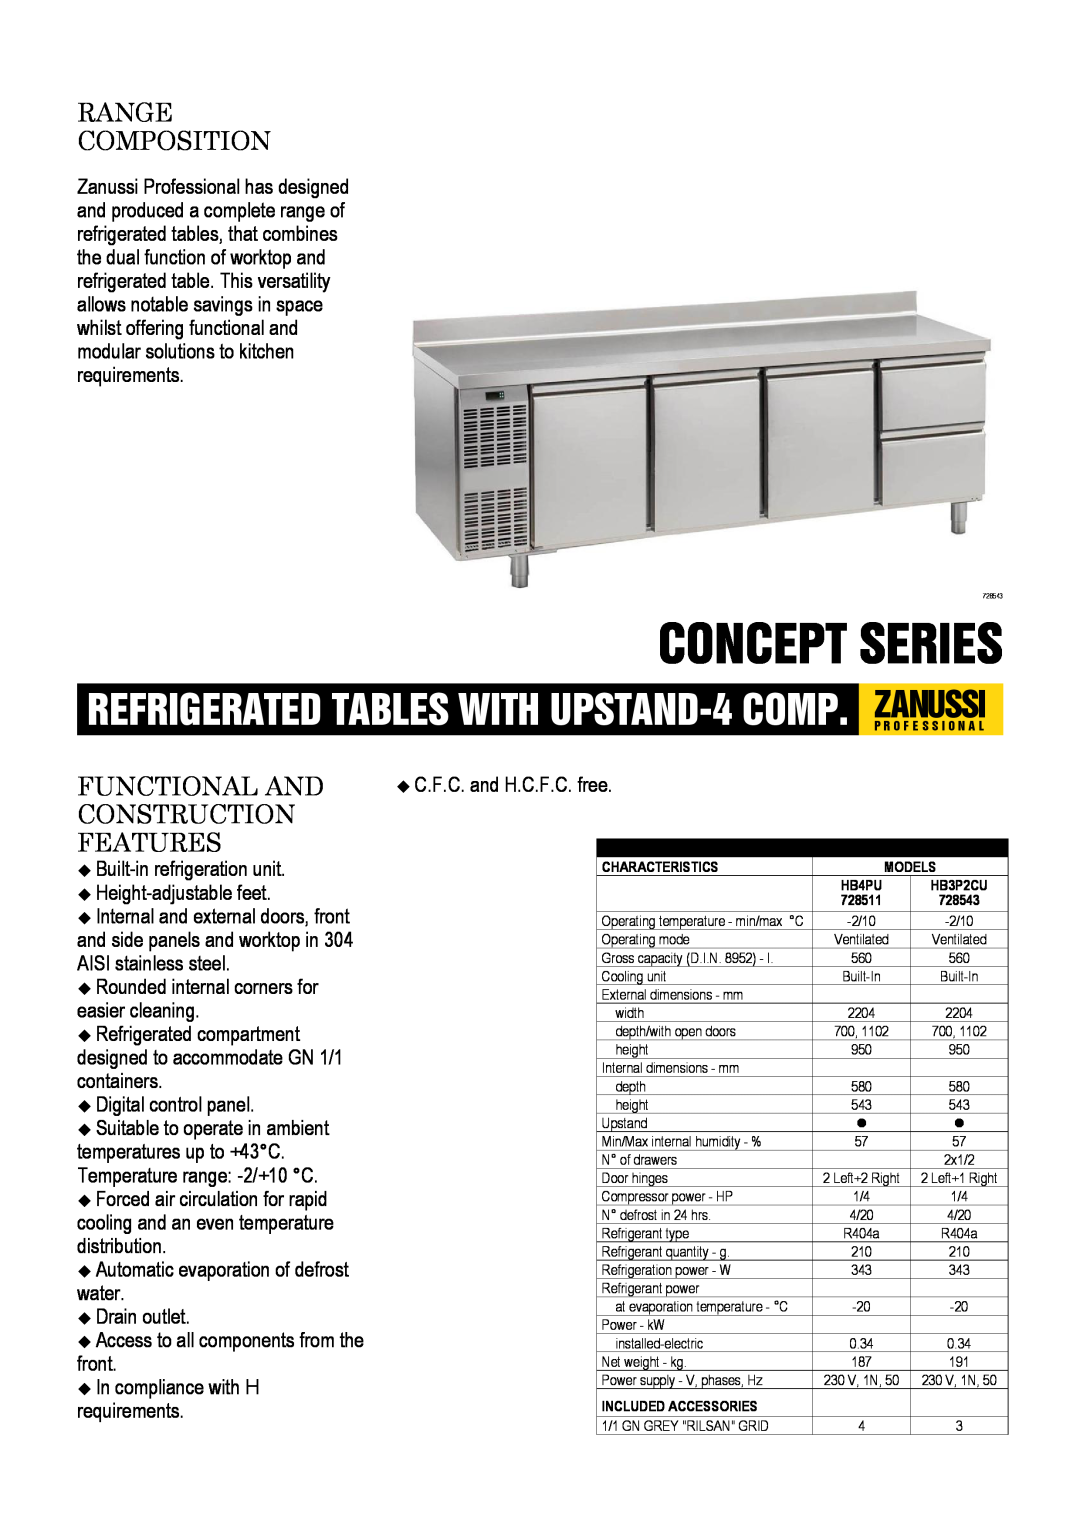 Zanussi 728511, 728543, HB3P2CU, HB4PU dimensions Concept Series, Range Composition, Functional And Construction Features 